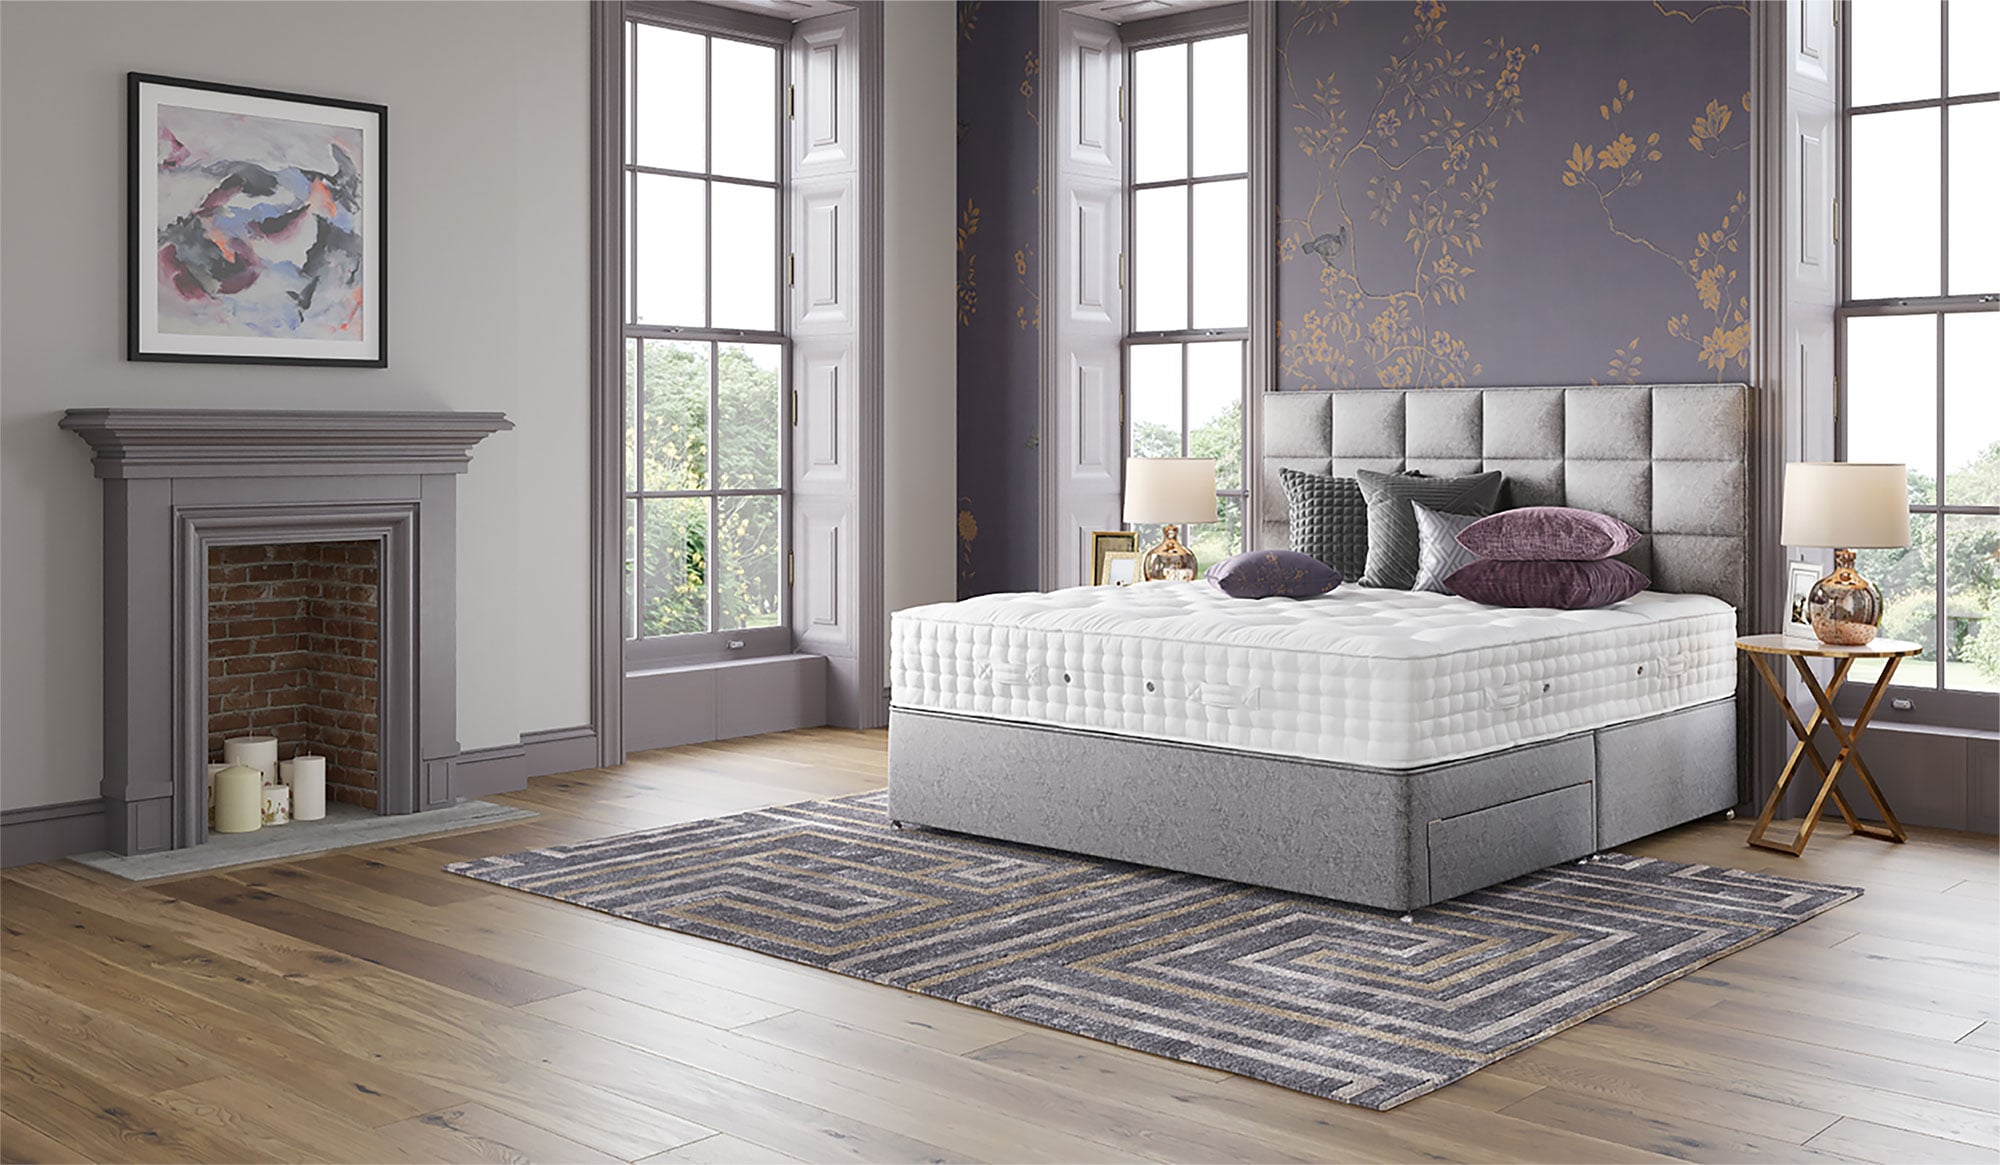 beds and mattresses on line